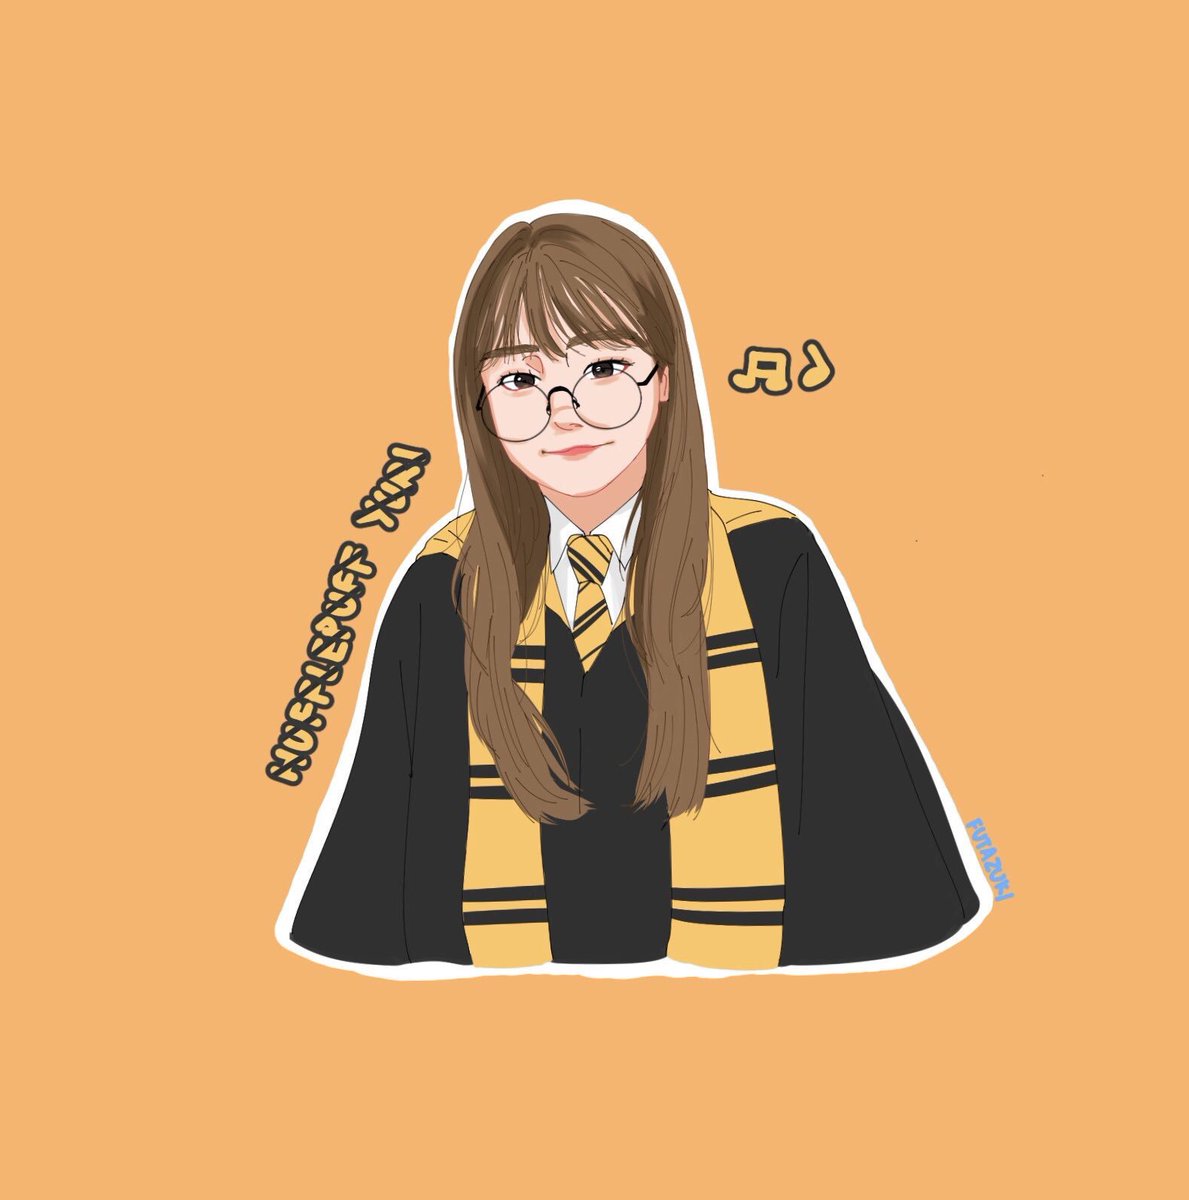 Yuri: HufflepuffGoes around school with Yena all the time. They’re inseparable roomies. Wants to take Muggle Music for her 3rd Year. #조유리  #ジョユリ  #JoYuri